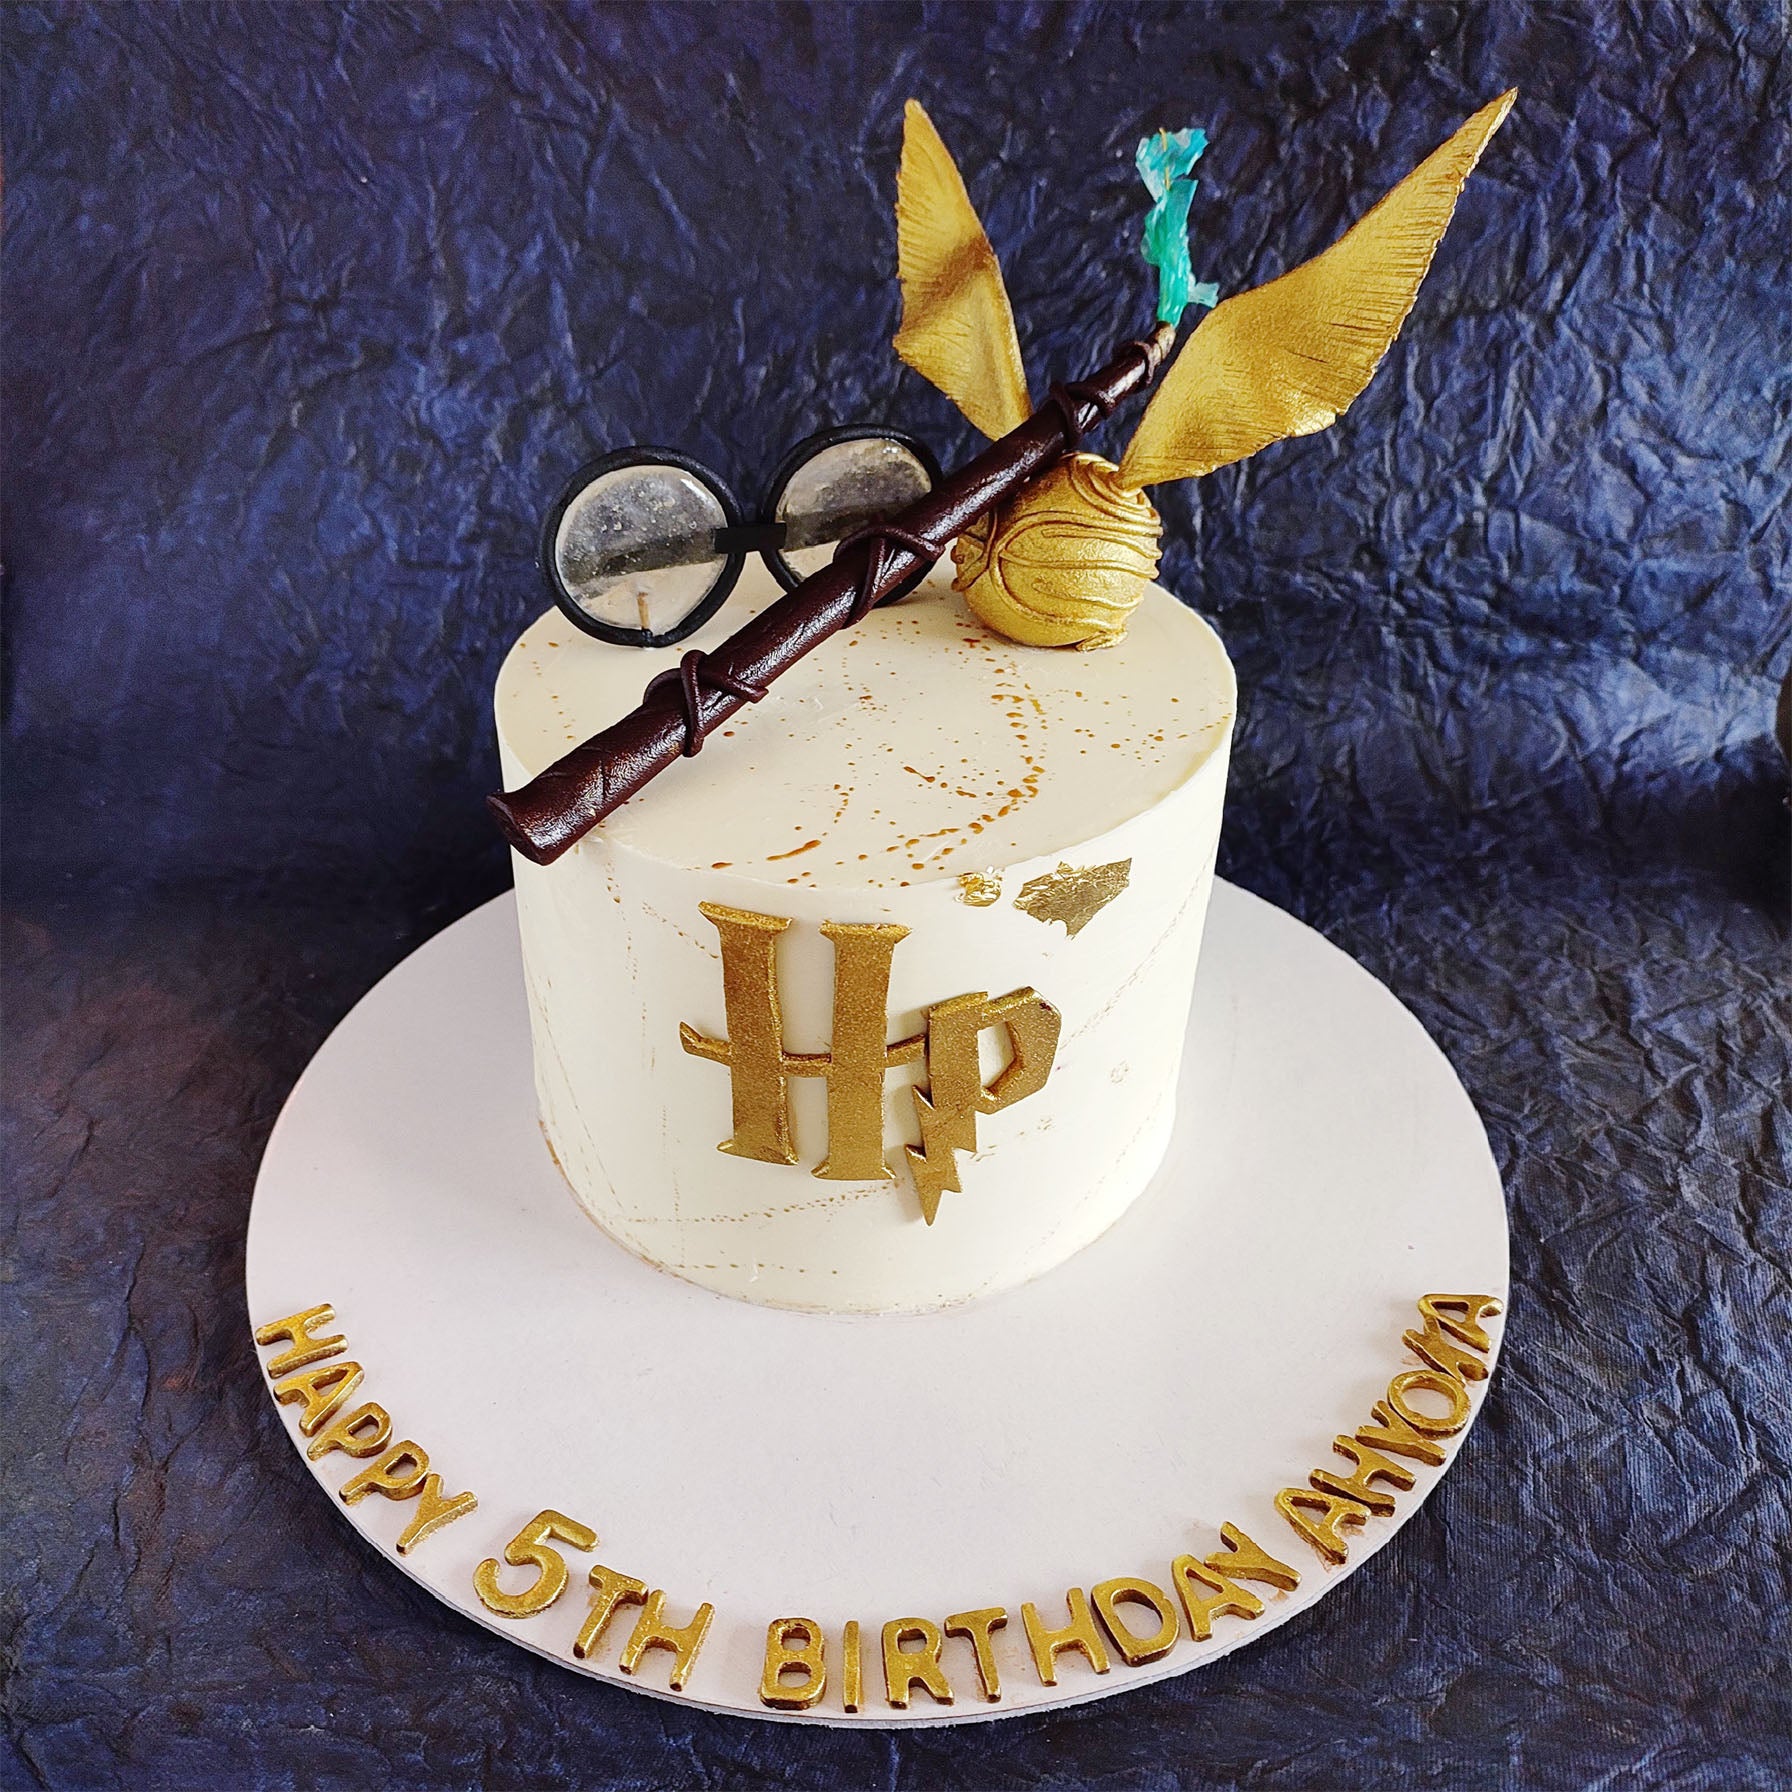 Harry Potter Theme ❤️ . Cake 🎂 By @_cake_cream_ ❤️ ••••••••••• . . DM for  Queries and Orders ❤️ Delivering PAN India 🇮🇳 . . . . Follow… | Instagram